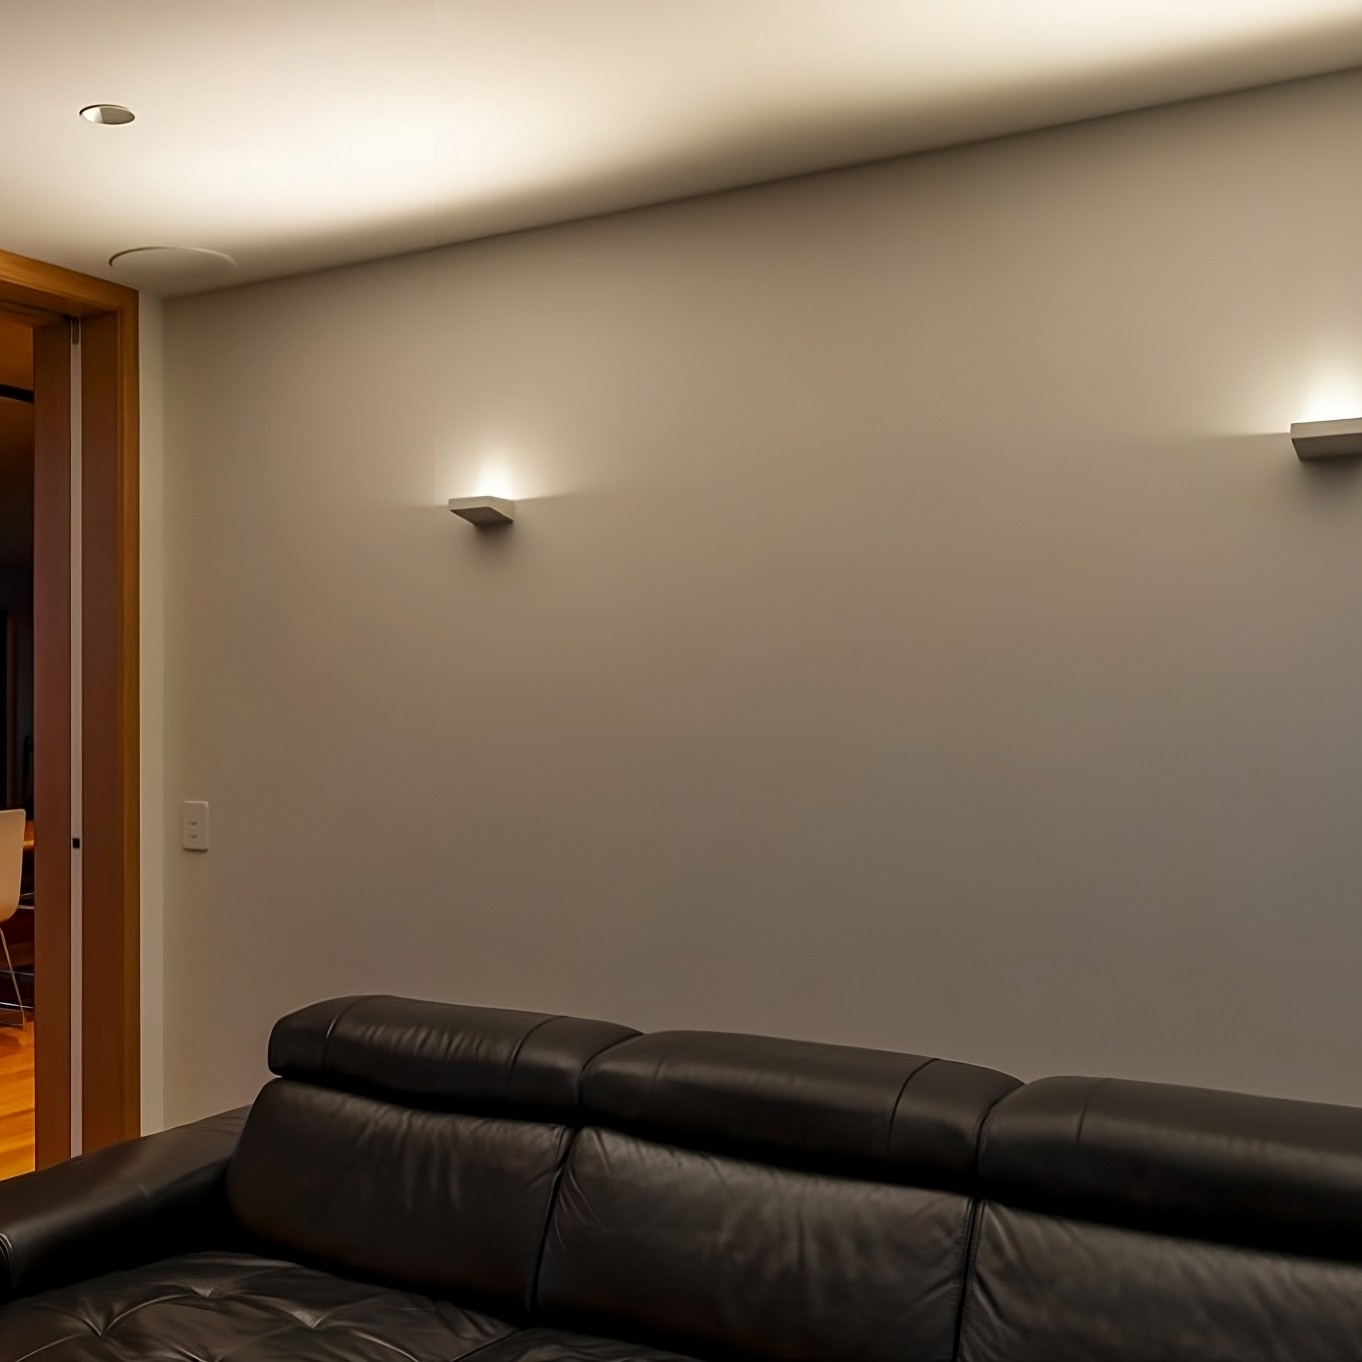 image of two cirro wall light is a lounge with the light washing across the ceiling